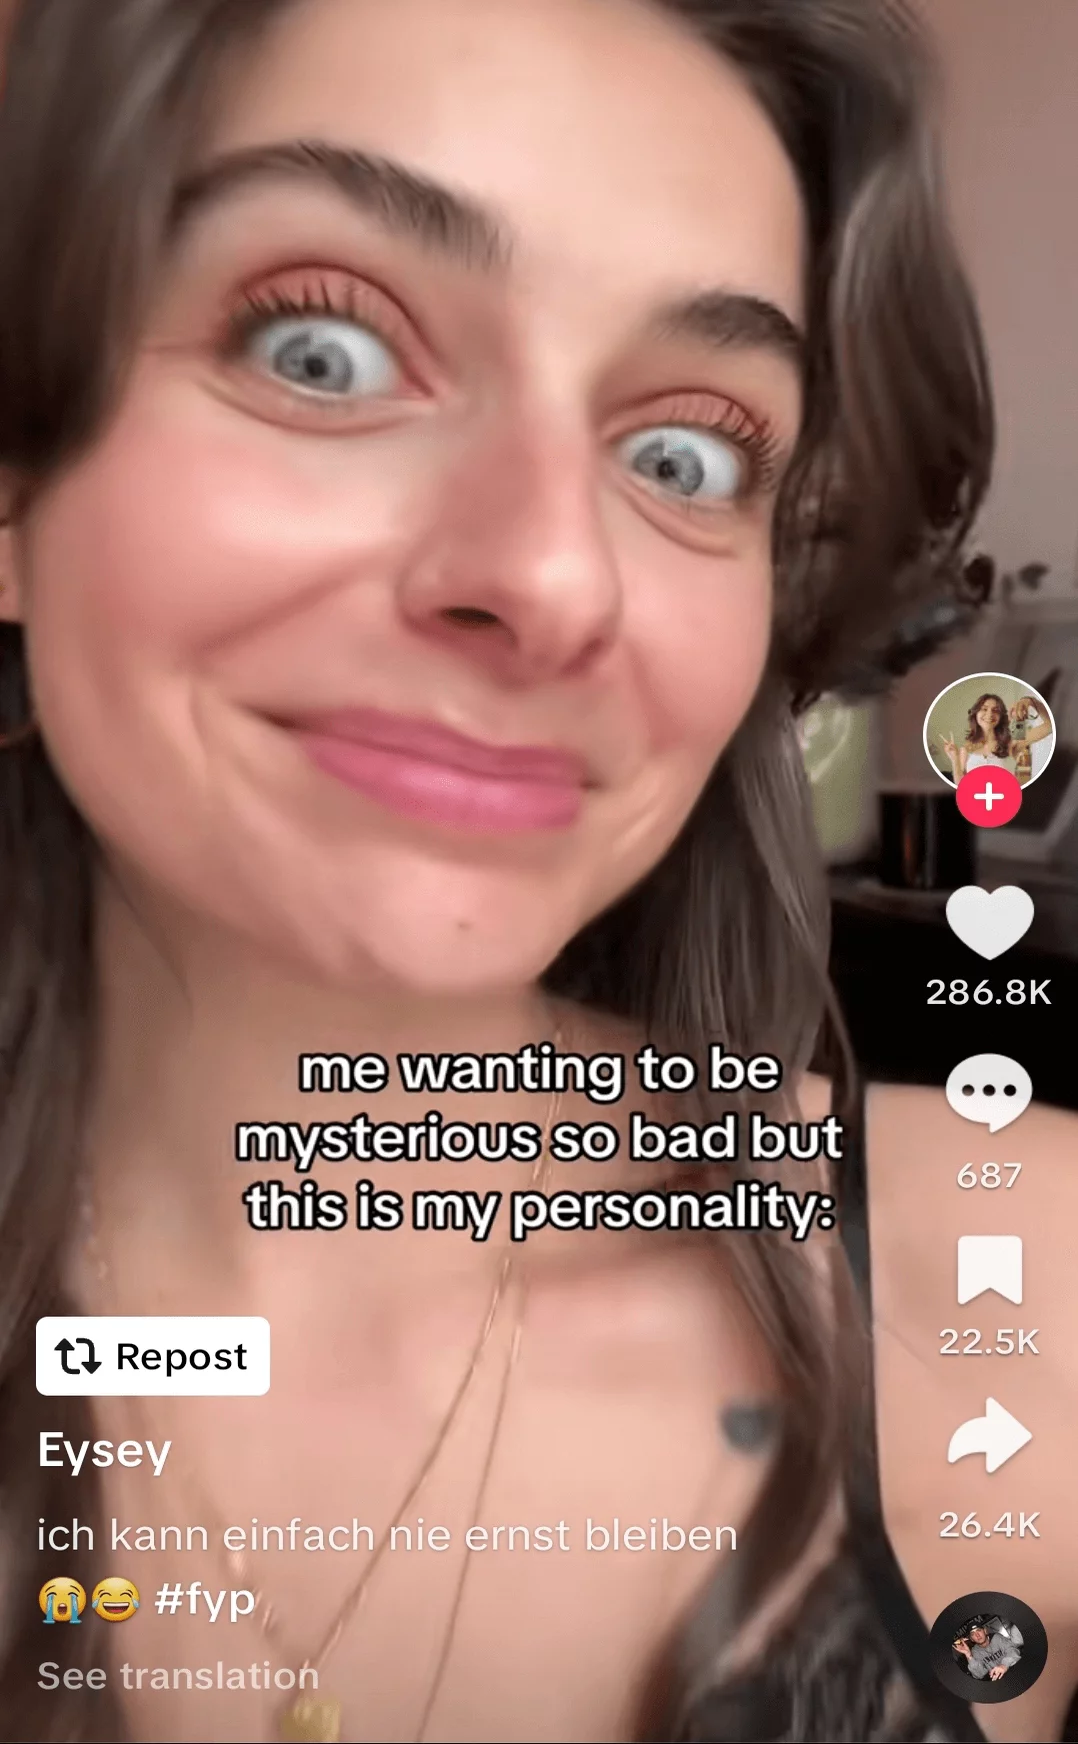 Woman making a humorous face close-up, conveying her quirky personality on TikTok.